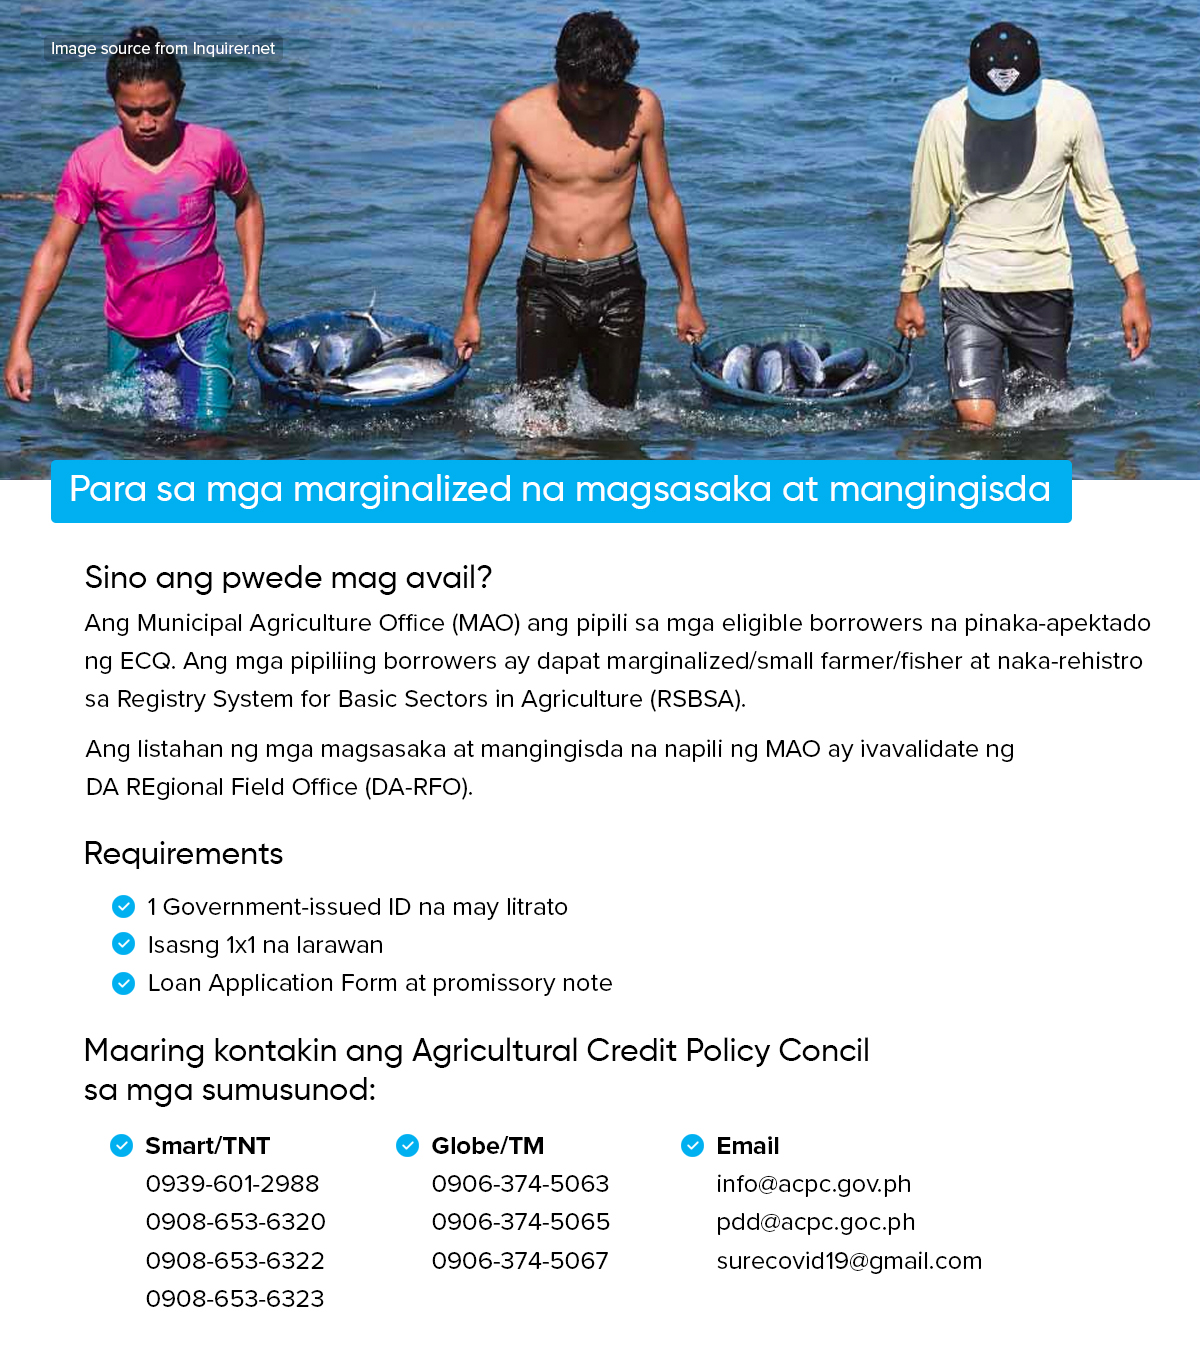 How to Apply for SURE COVID-19 Loan Program for marginalized Farmers and Fisherfolks